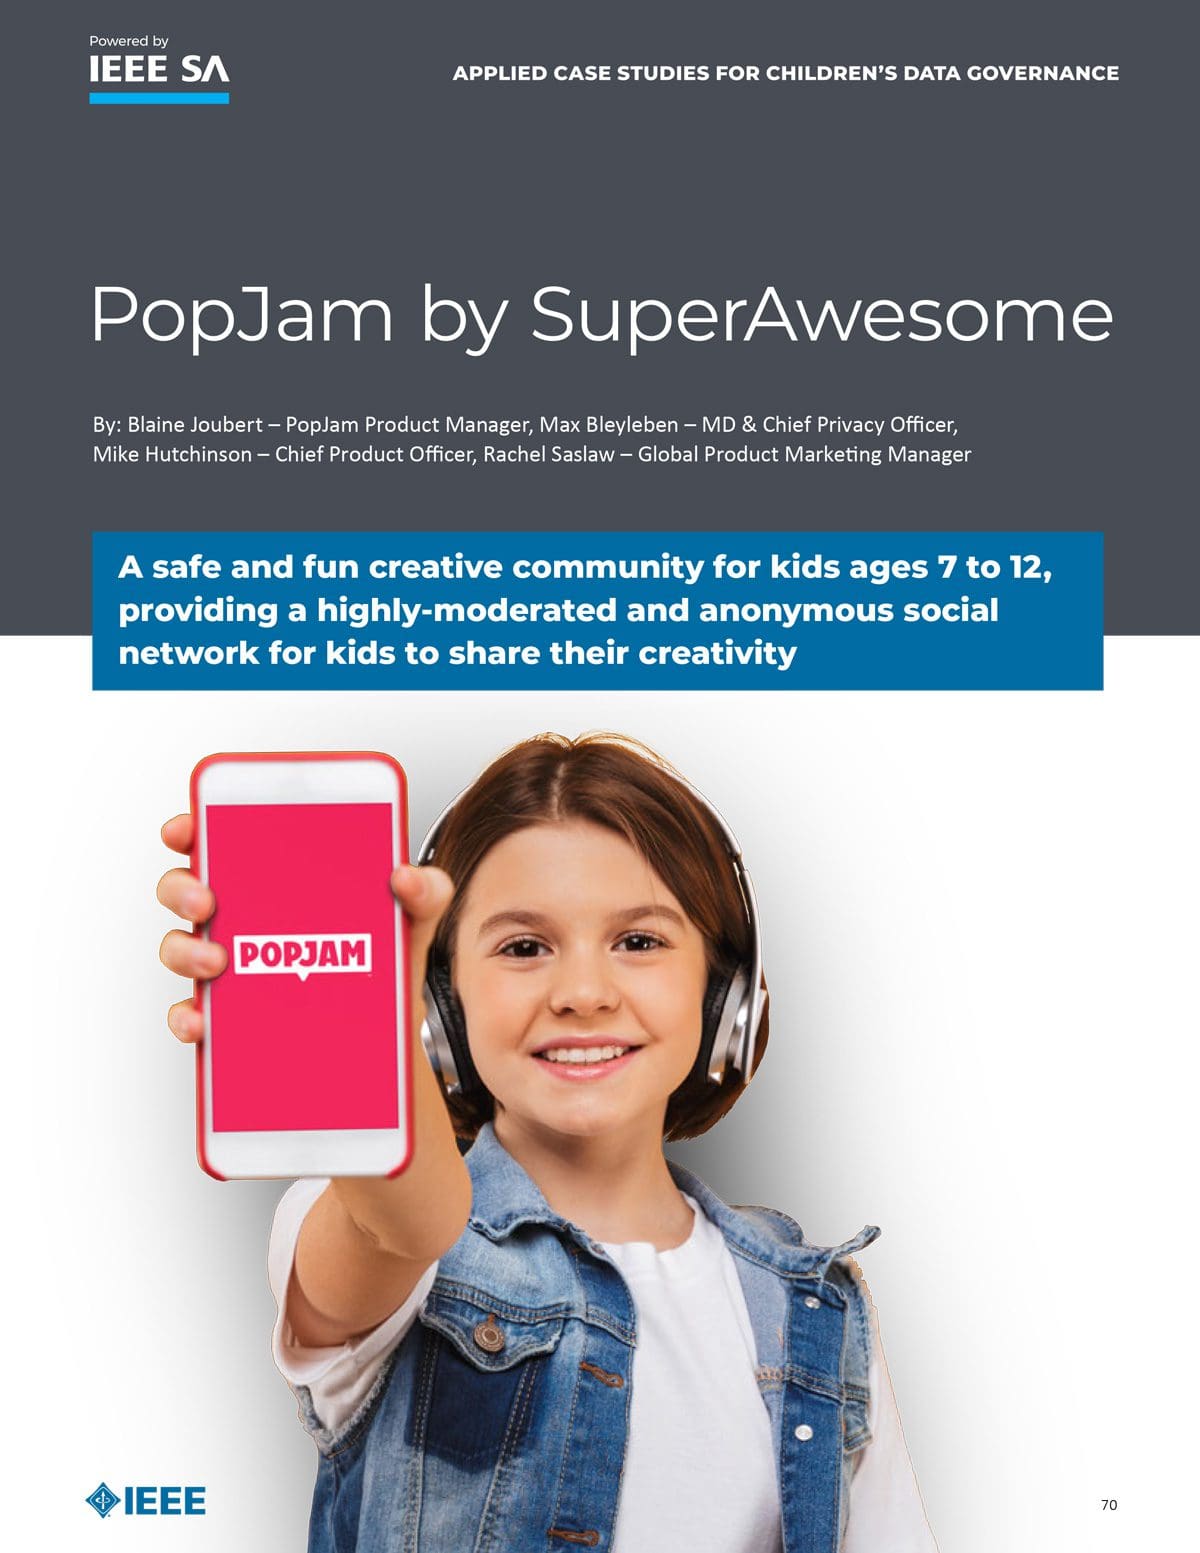 PopJam by SuperAwesome